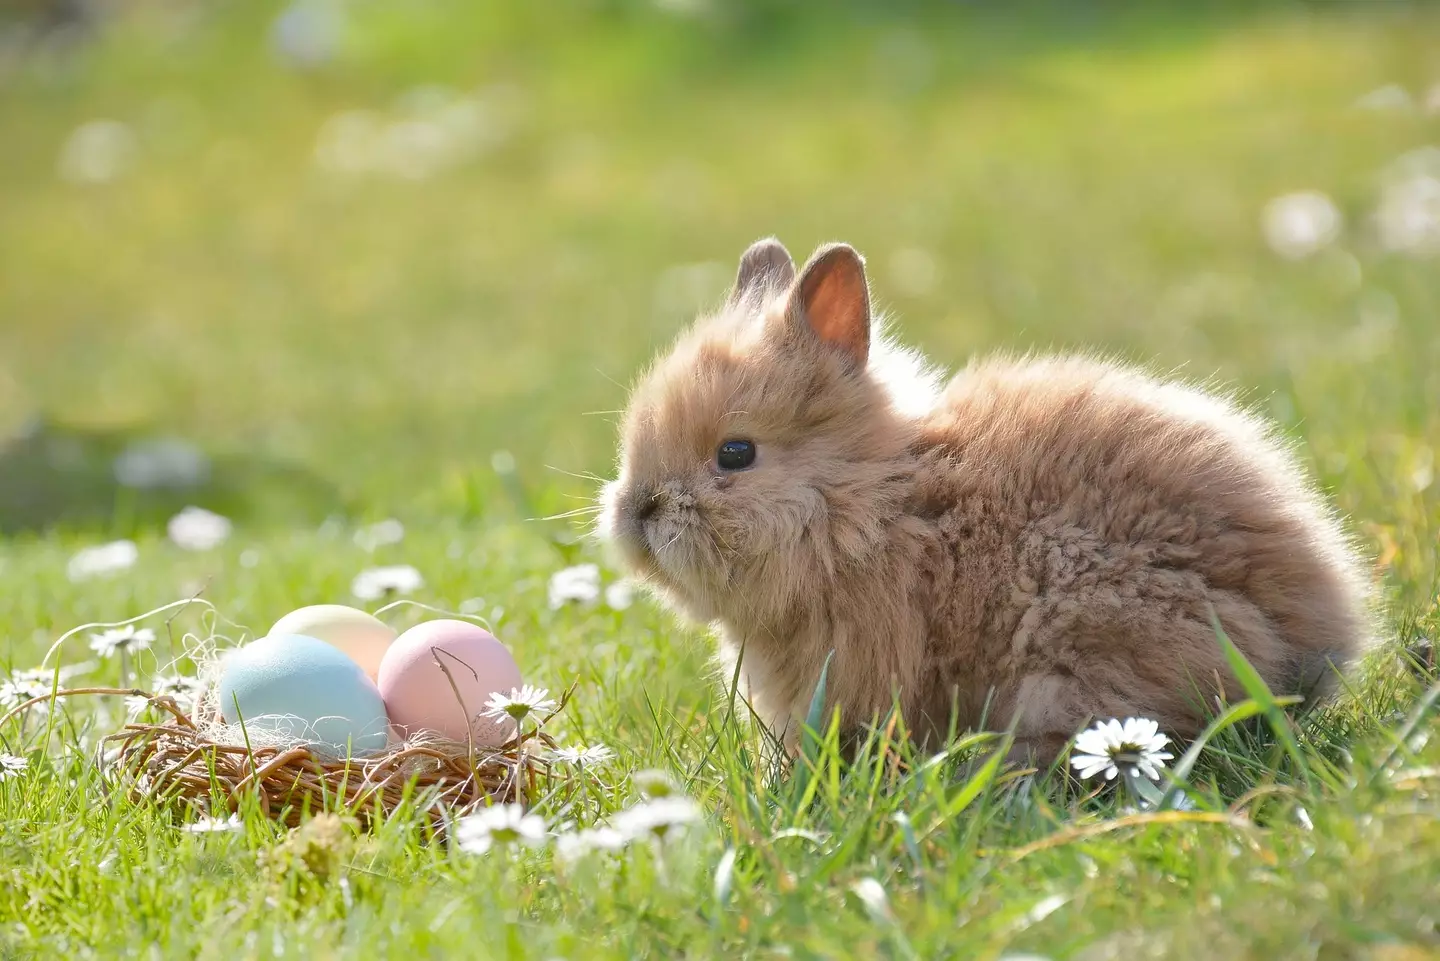 Mathew believes it's unfair to lie about the Easter Bunny.